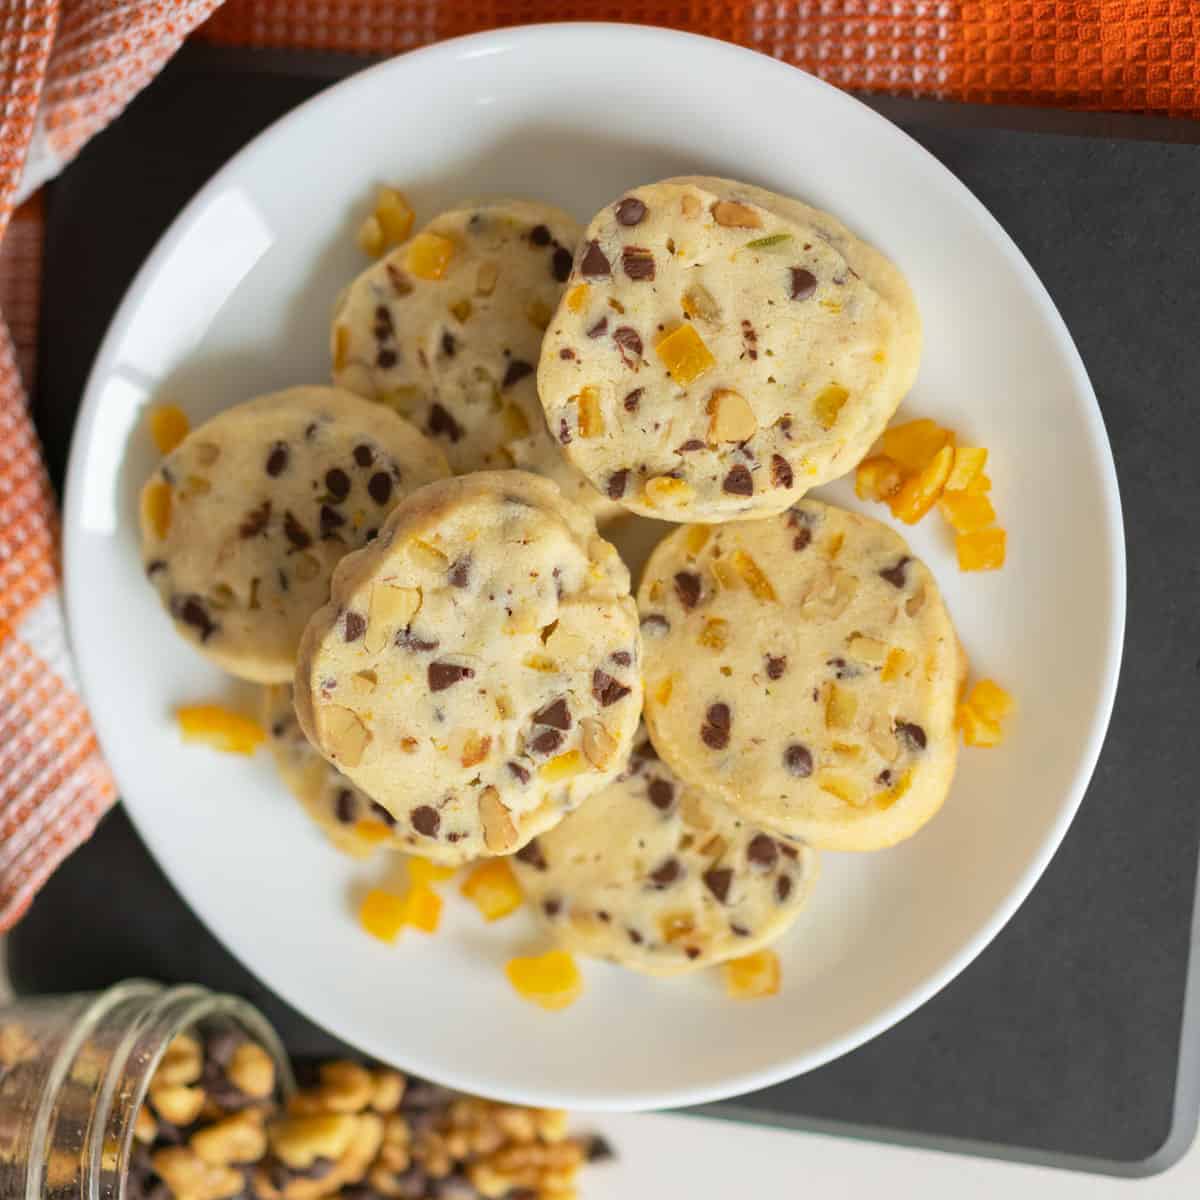 Baked Chocolate with Walnut and orange peel cookies displayed on a white plate.